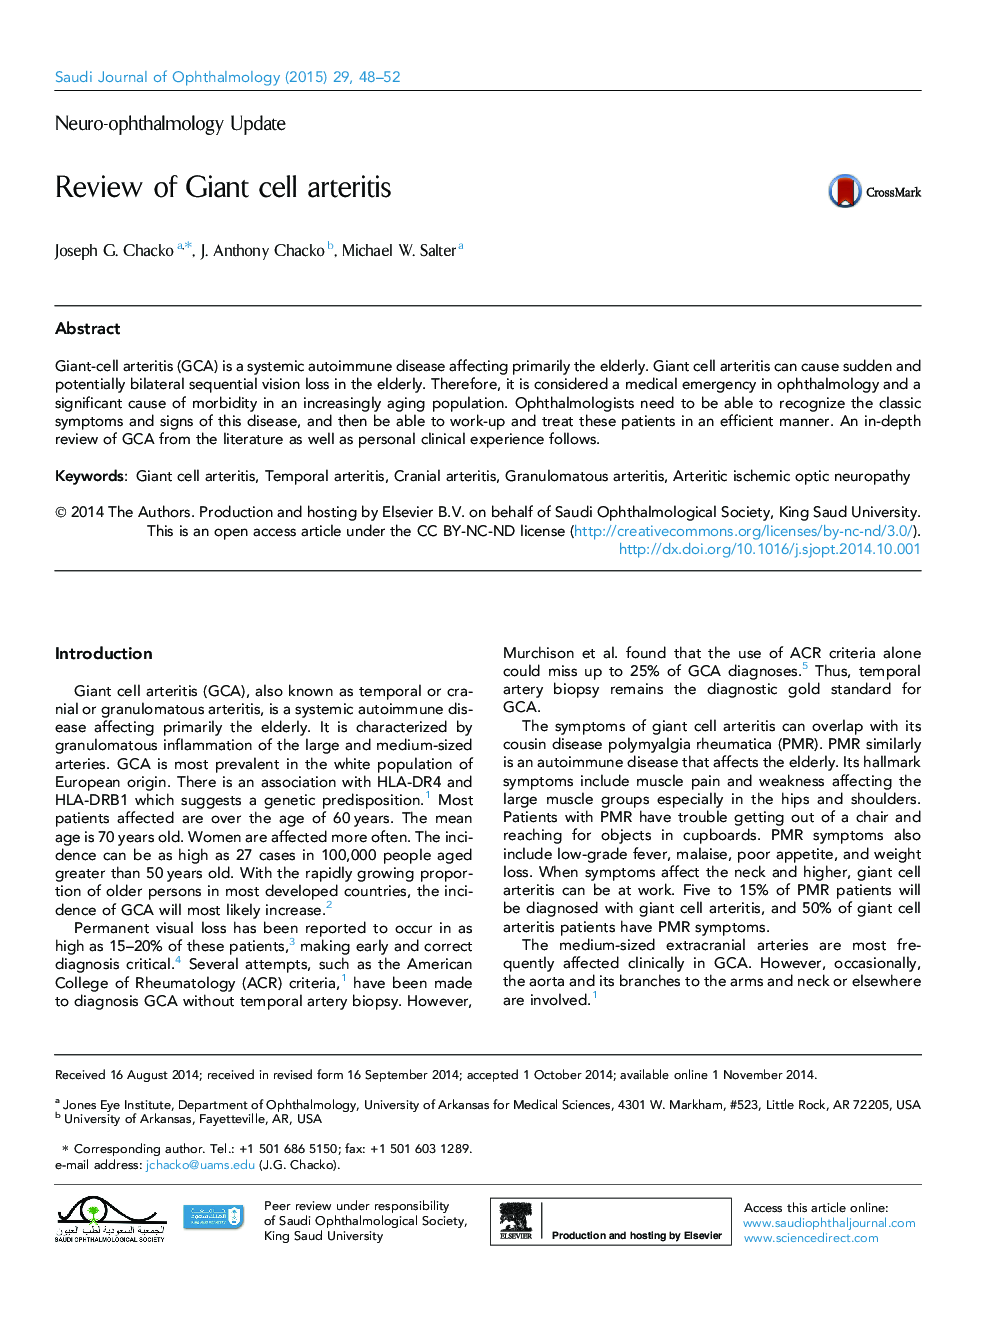 Review of Giant cell arteritis 